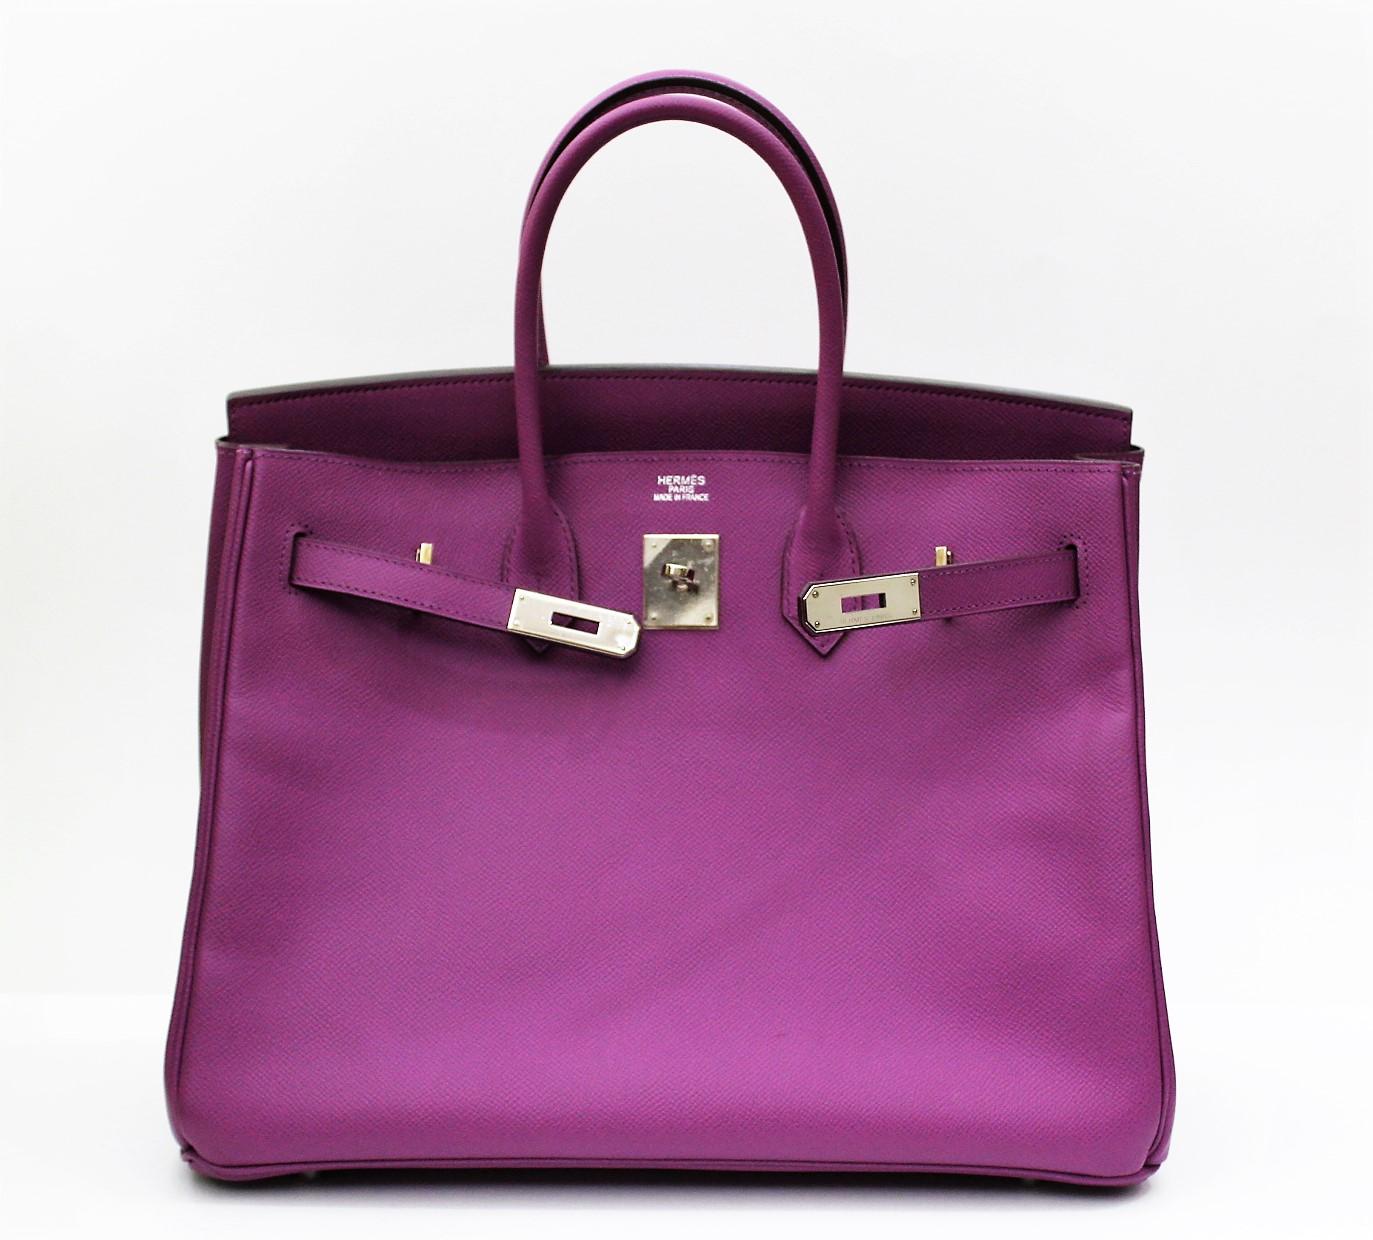 The beautiful combination of Cyclamen colors (purple) and palladium (silver-color) make this Birkin 35 of Hermès breathtaking. Made of grainy Epsom with a slight luster, it is absolutely a timeless beauty. Equipped with original Hermès dust bag,